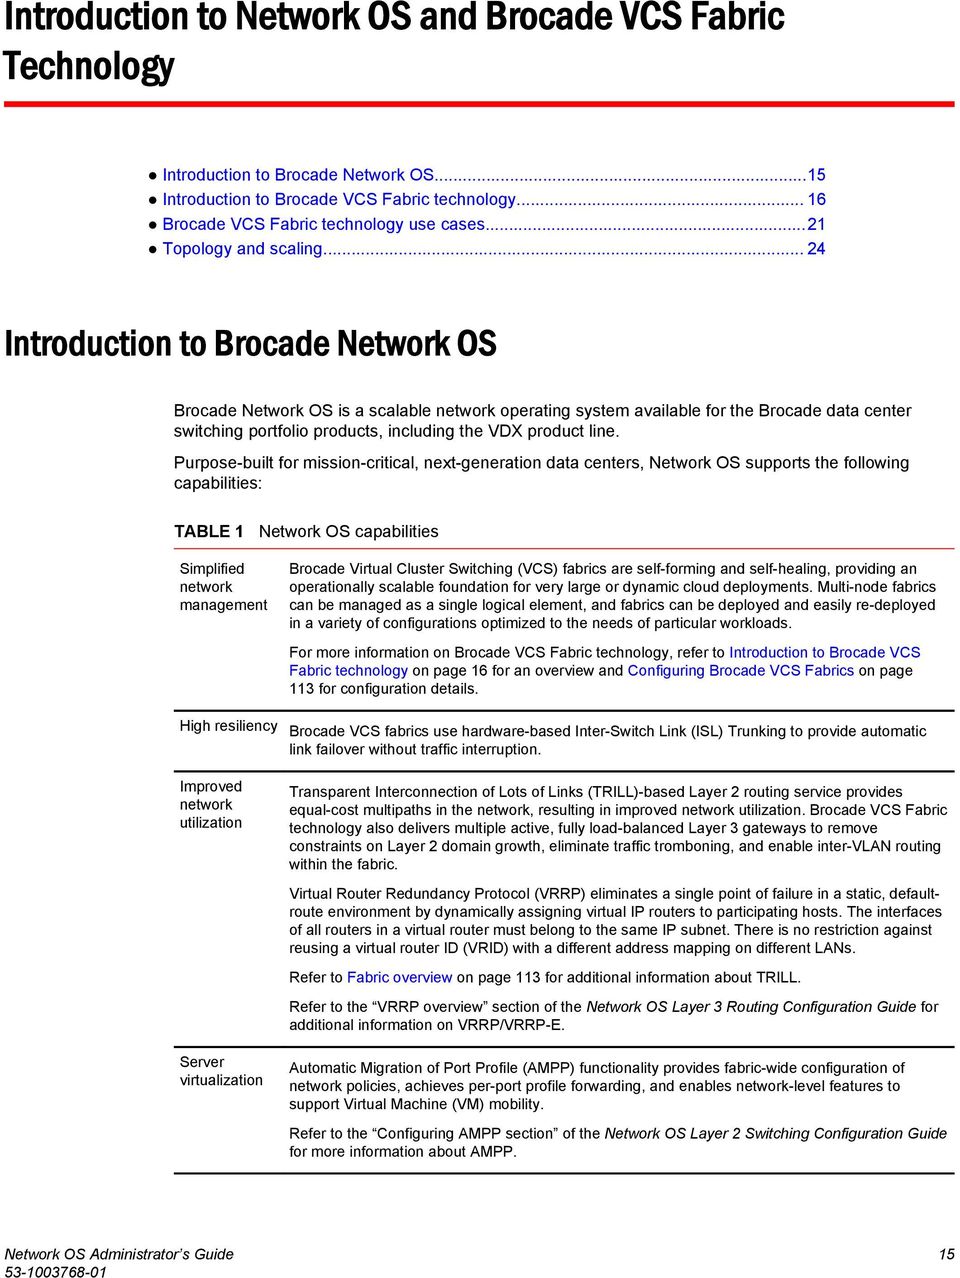 .. 24 Introduction to Brocade Network OS Brocade Network OS is a scalable network operating system available for the Brocade data center switching portfolio products, including the VDX product line.